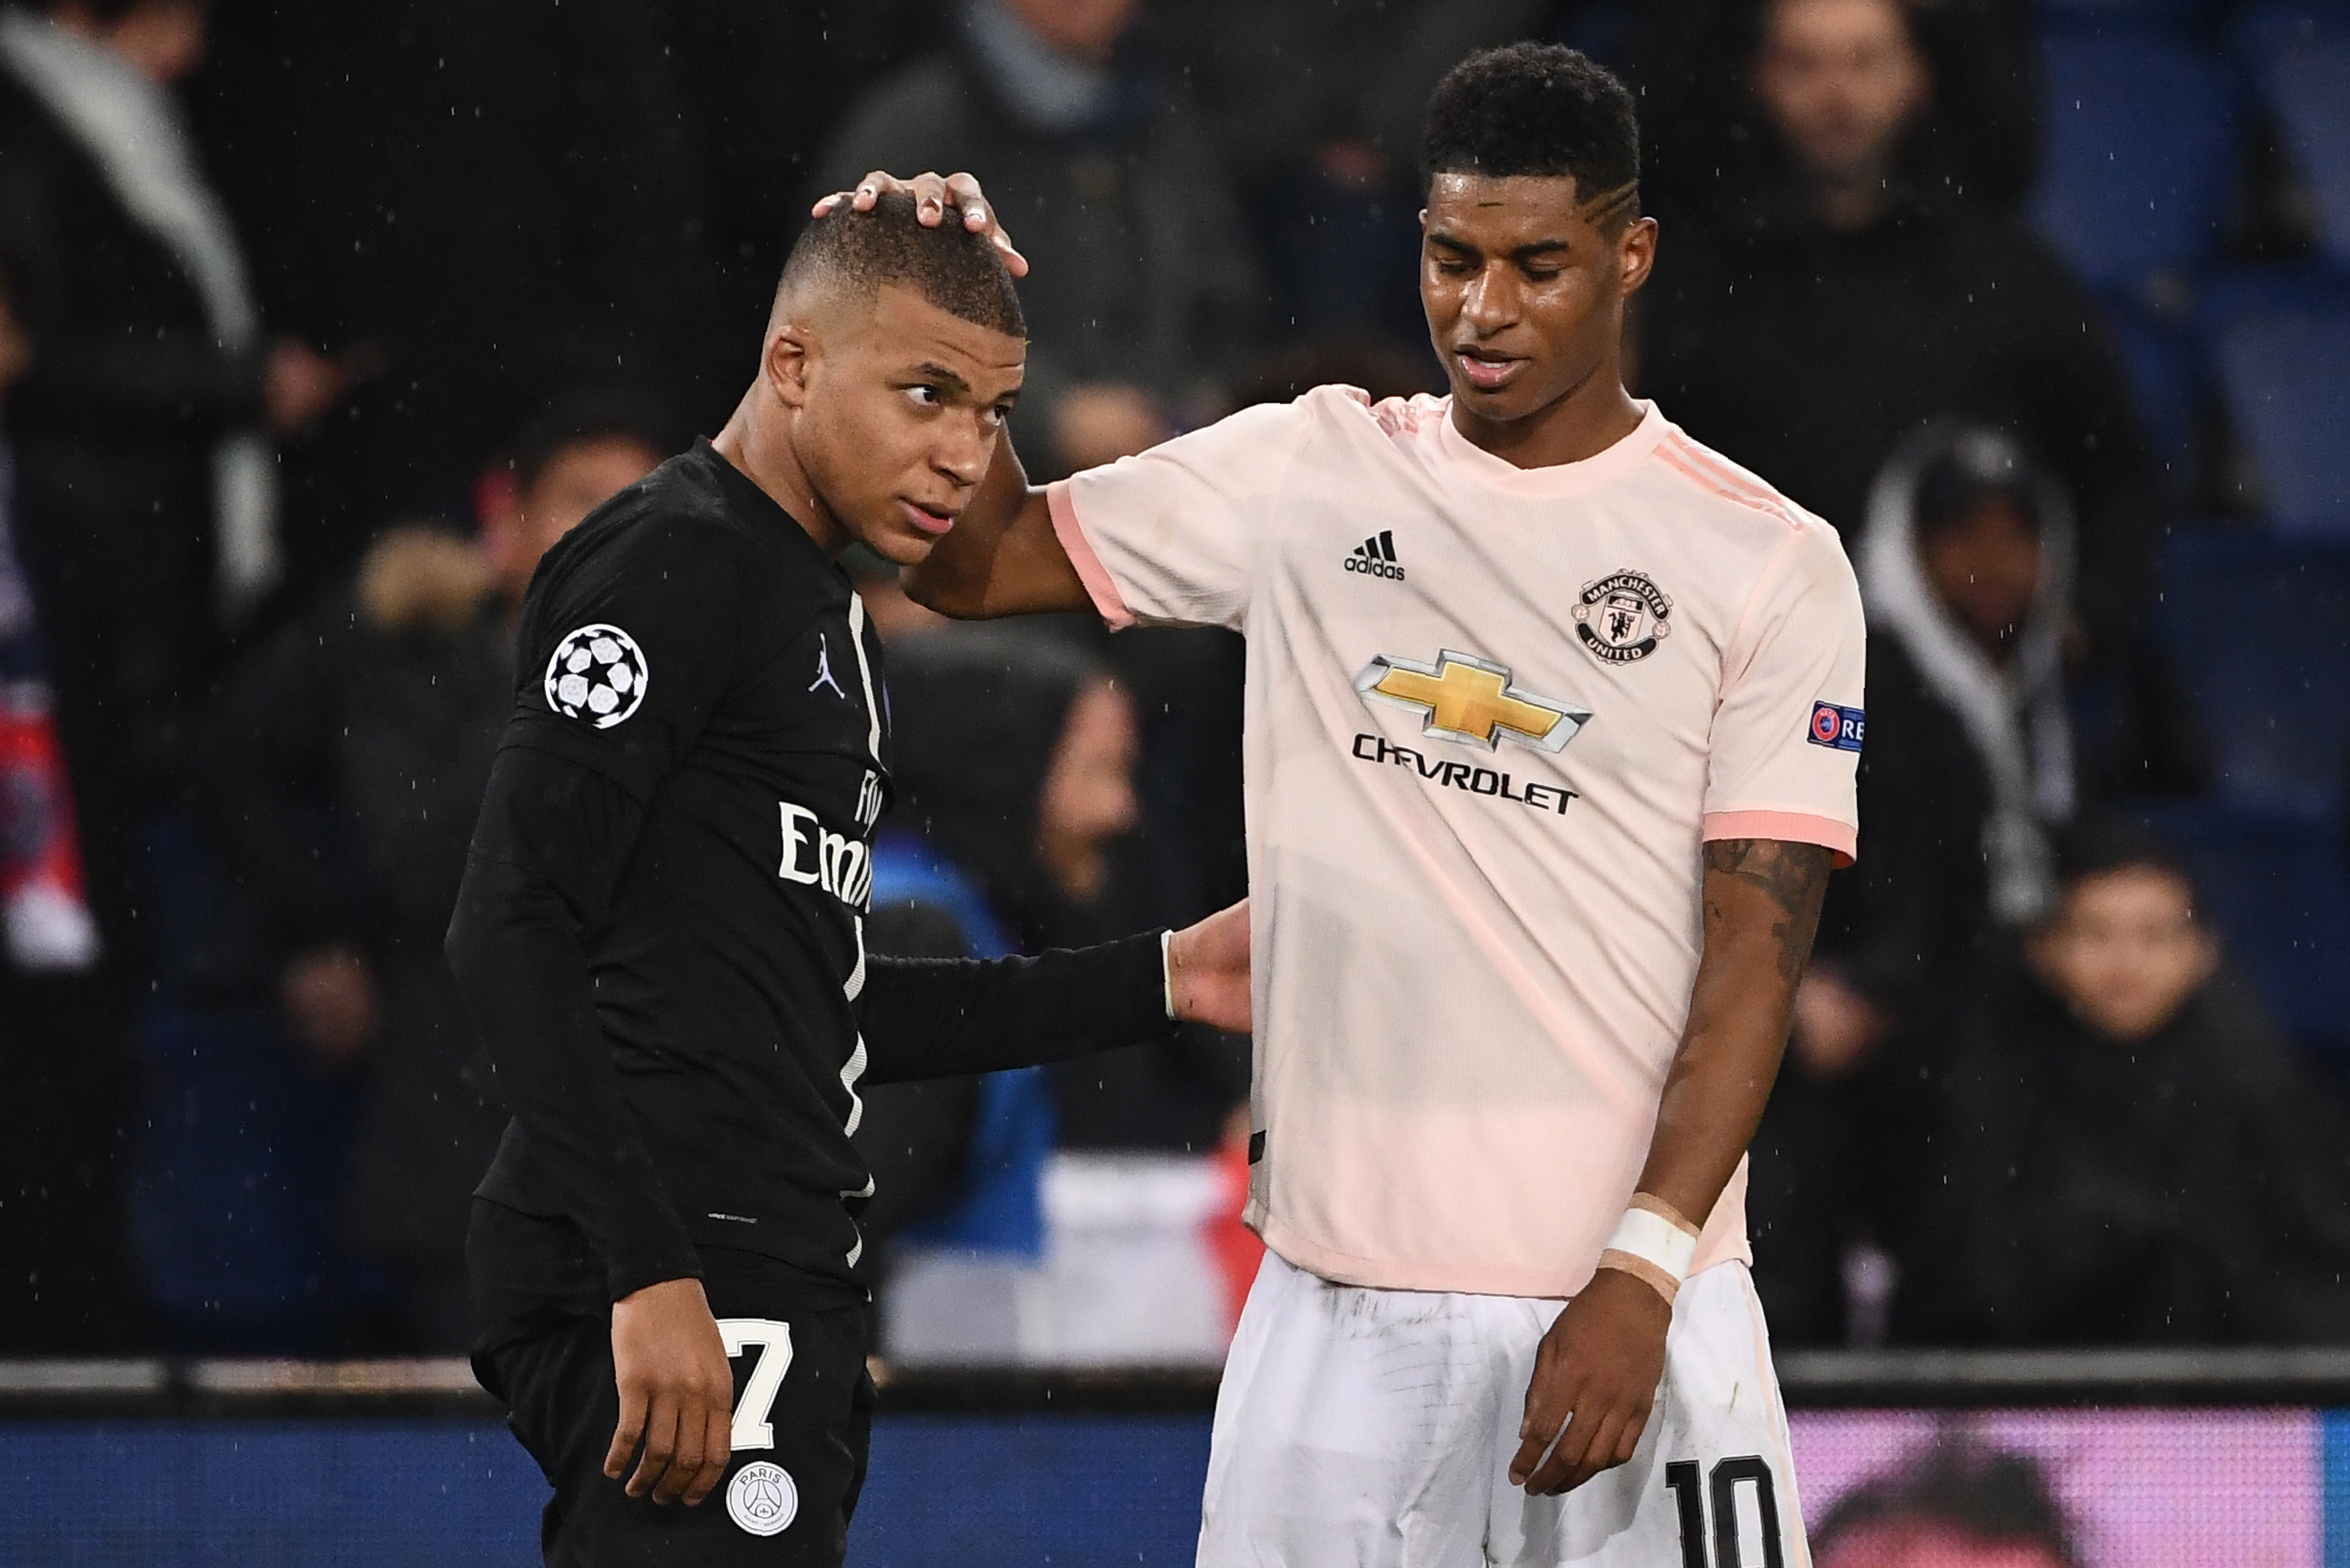 Marcus Rashford Transfer news: PSG in talks to sign Marcus Rashford from Man United, Christophe Galtier keen to add Manchester United striker starring Lionel Messi, Neymar and Kylian Mbappe - Check DETAILS